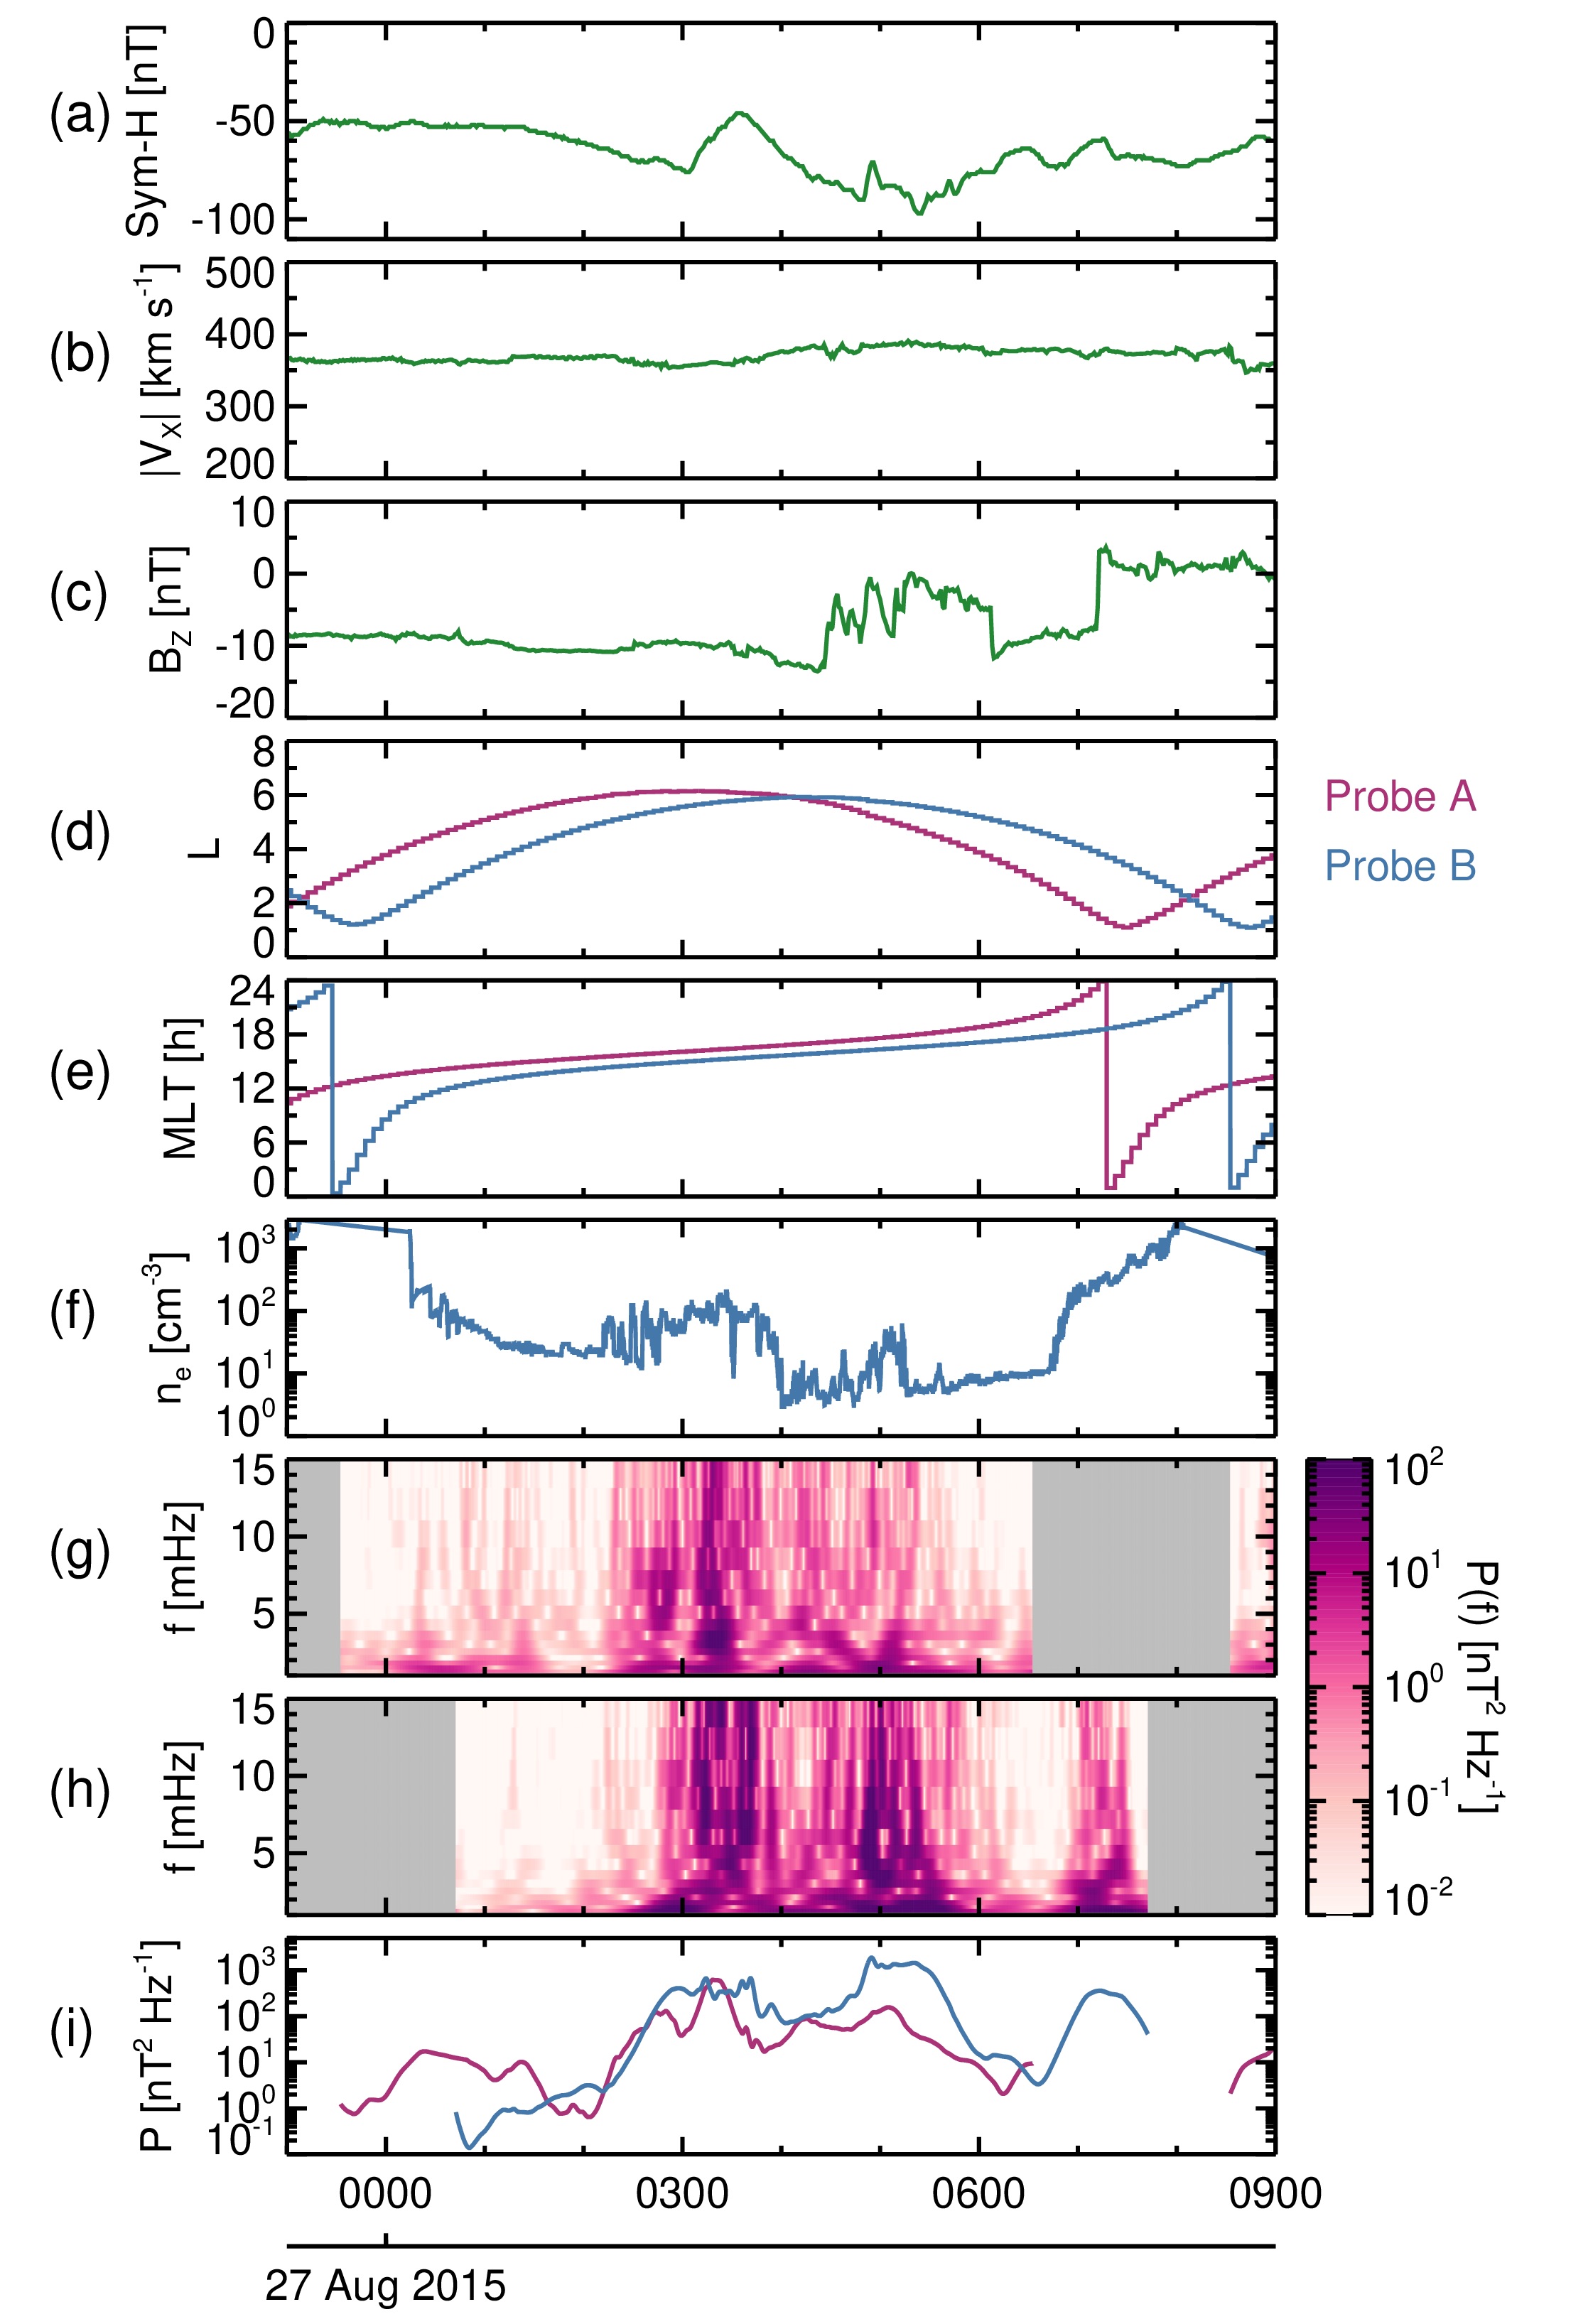 A multi-panel plot showing time series of Van Allen Probes observations during an event.